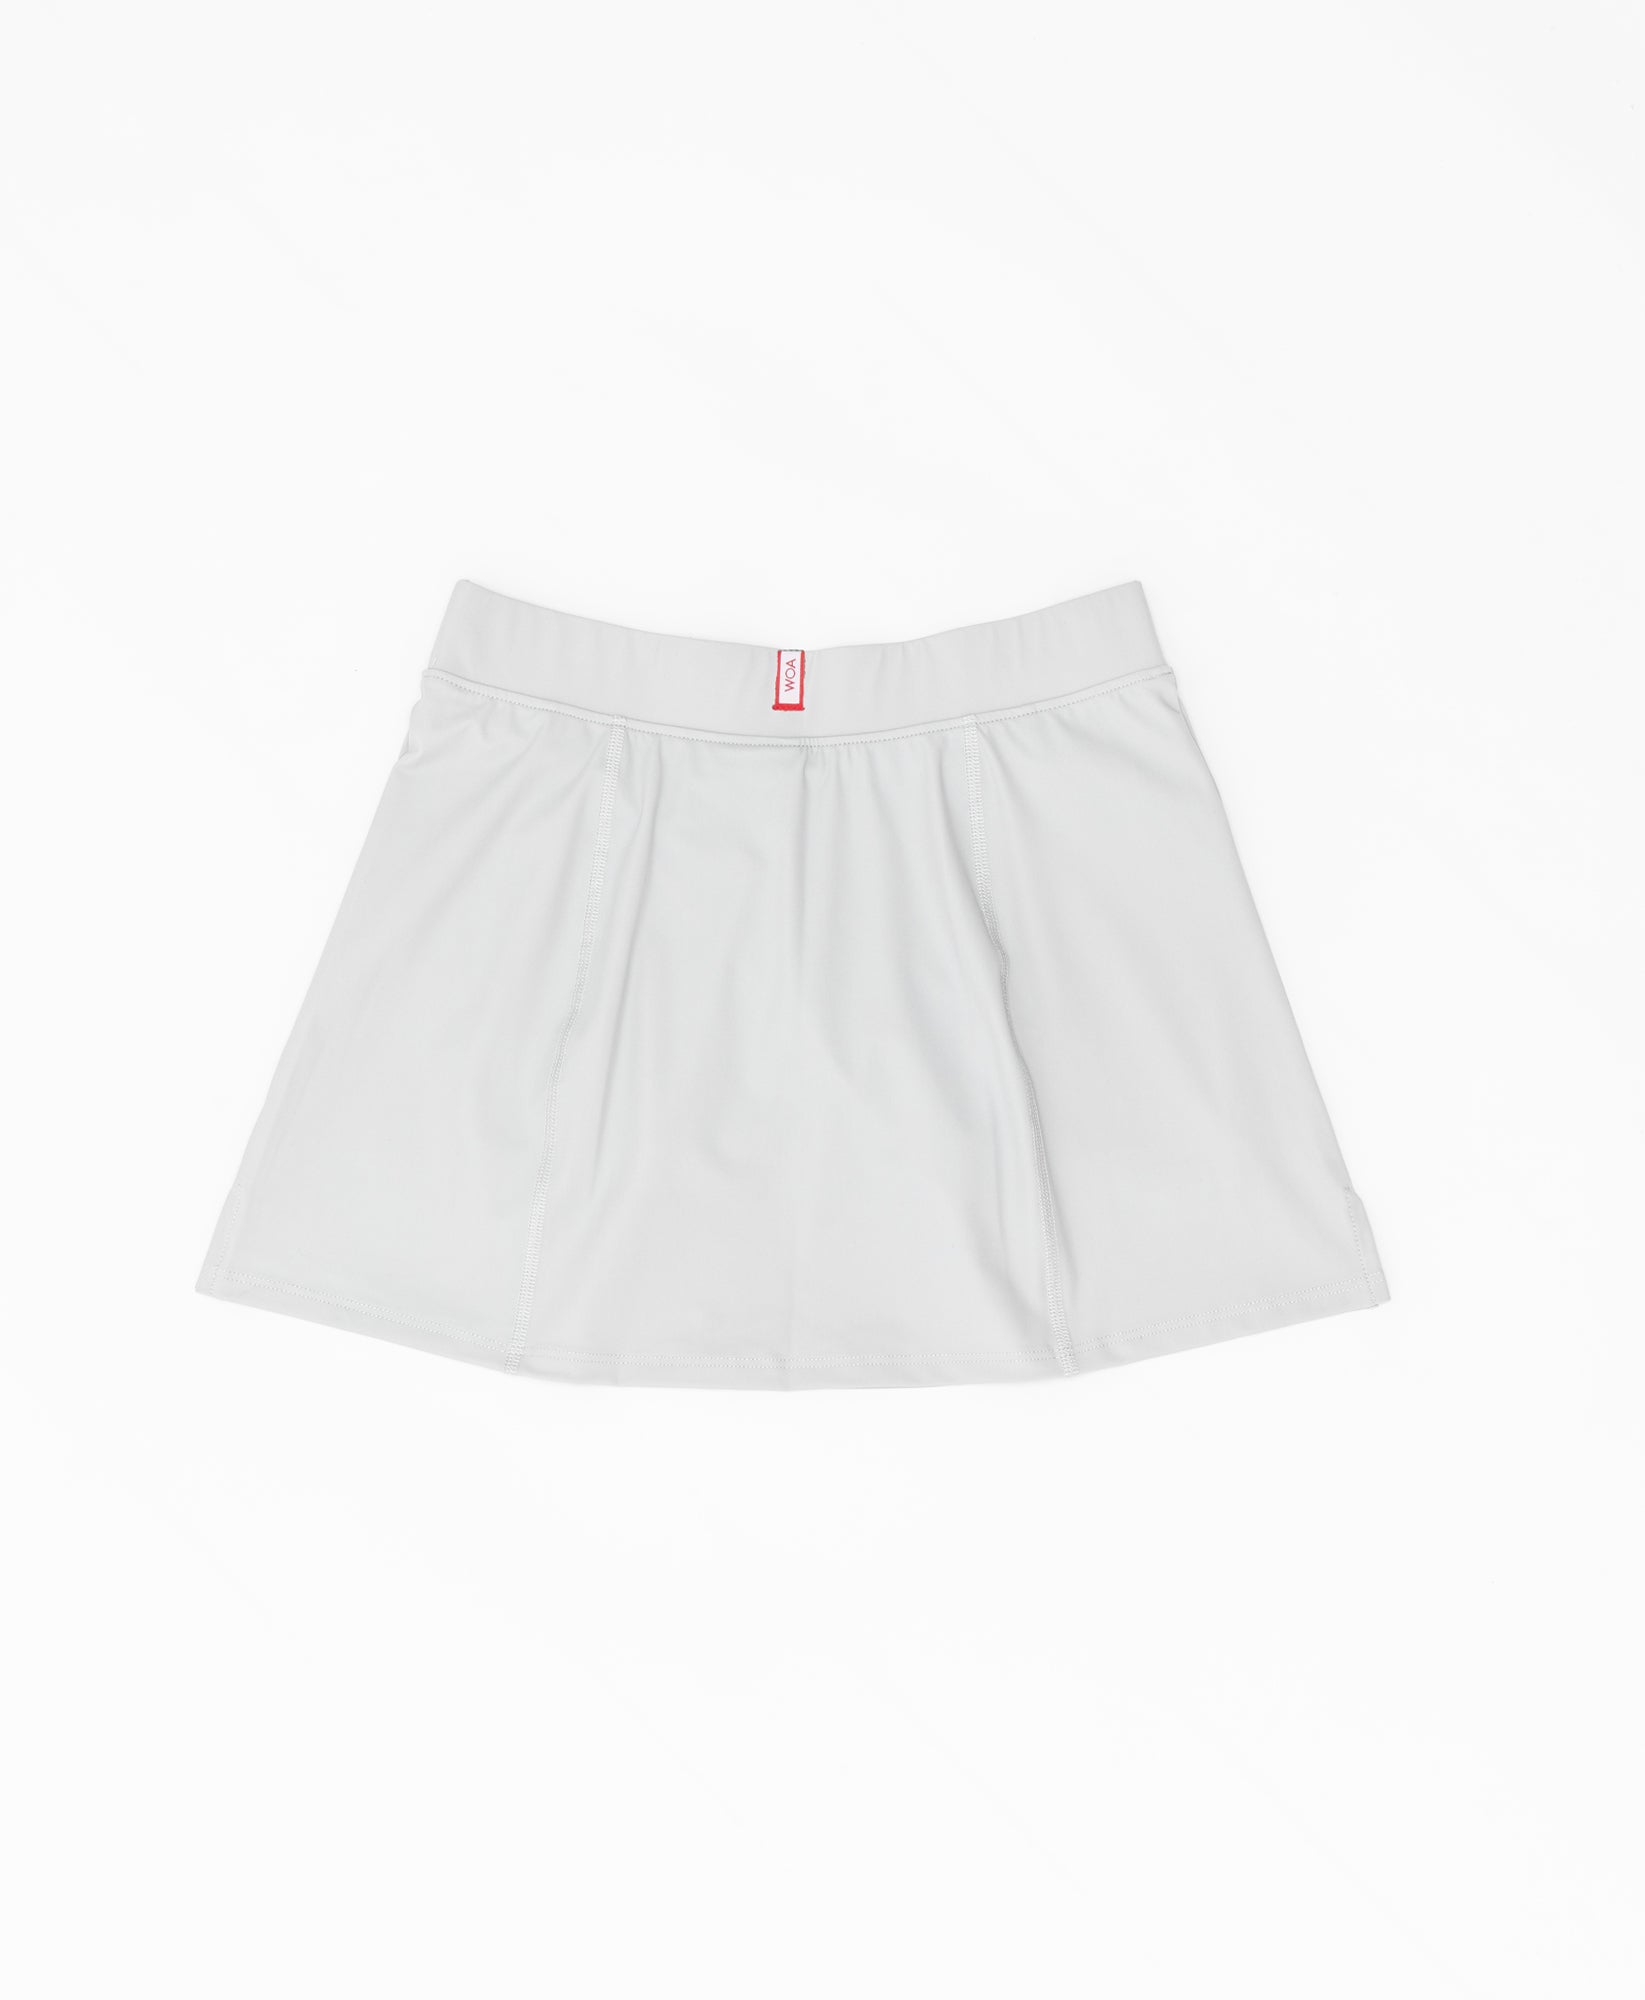 Wear One's At Simple Skort in Cloud Color on Model Full Front View